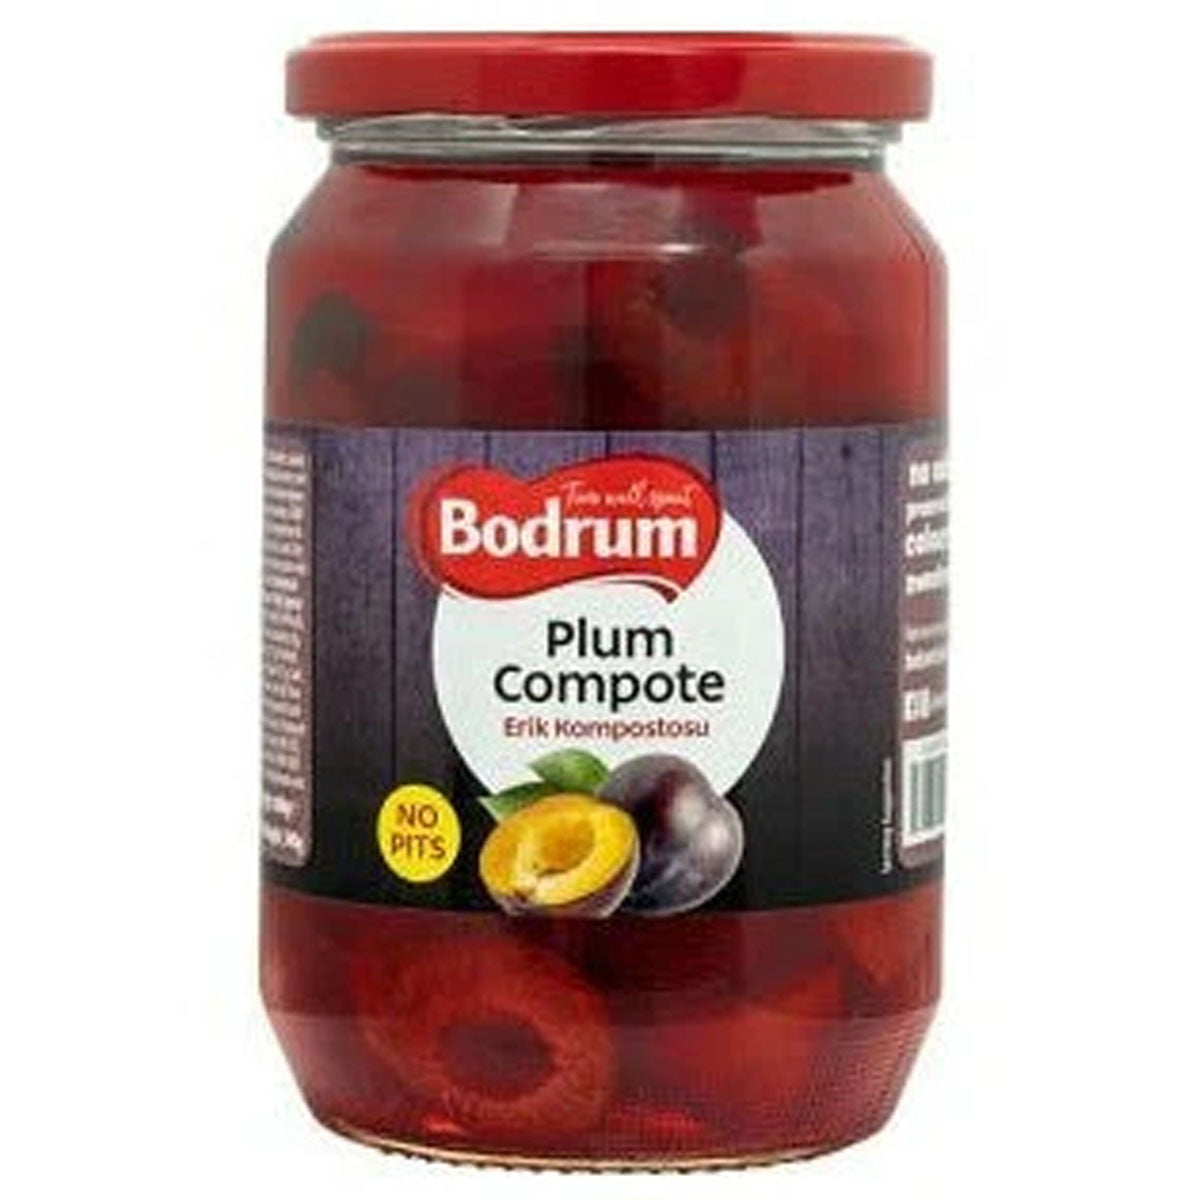 Bodrum - Plum Compote - 680g - Continental Food Store